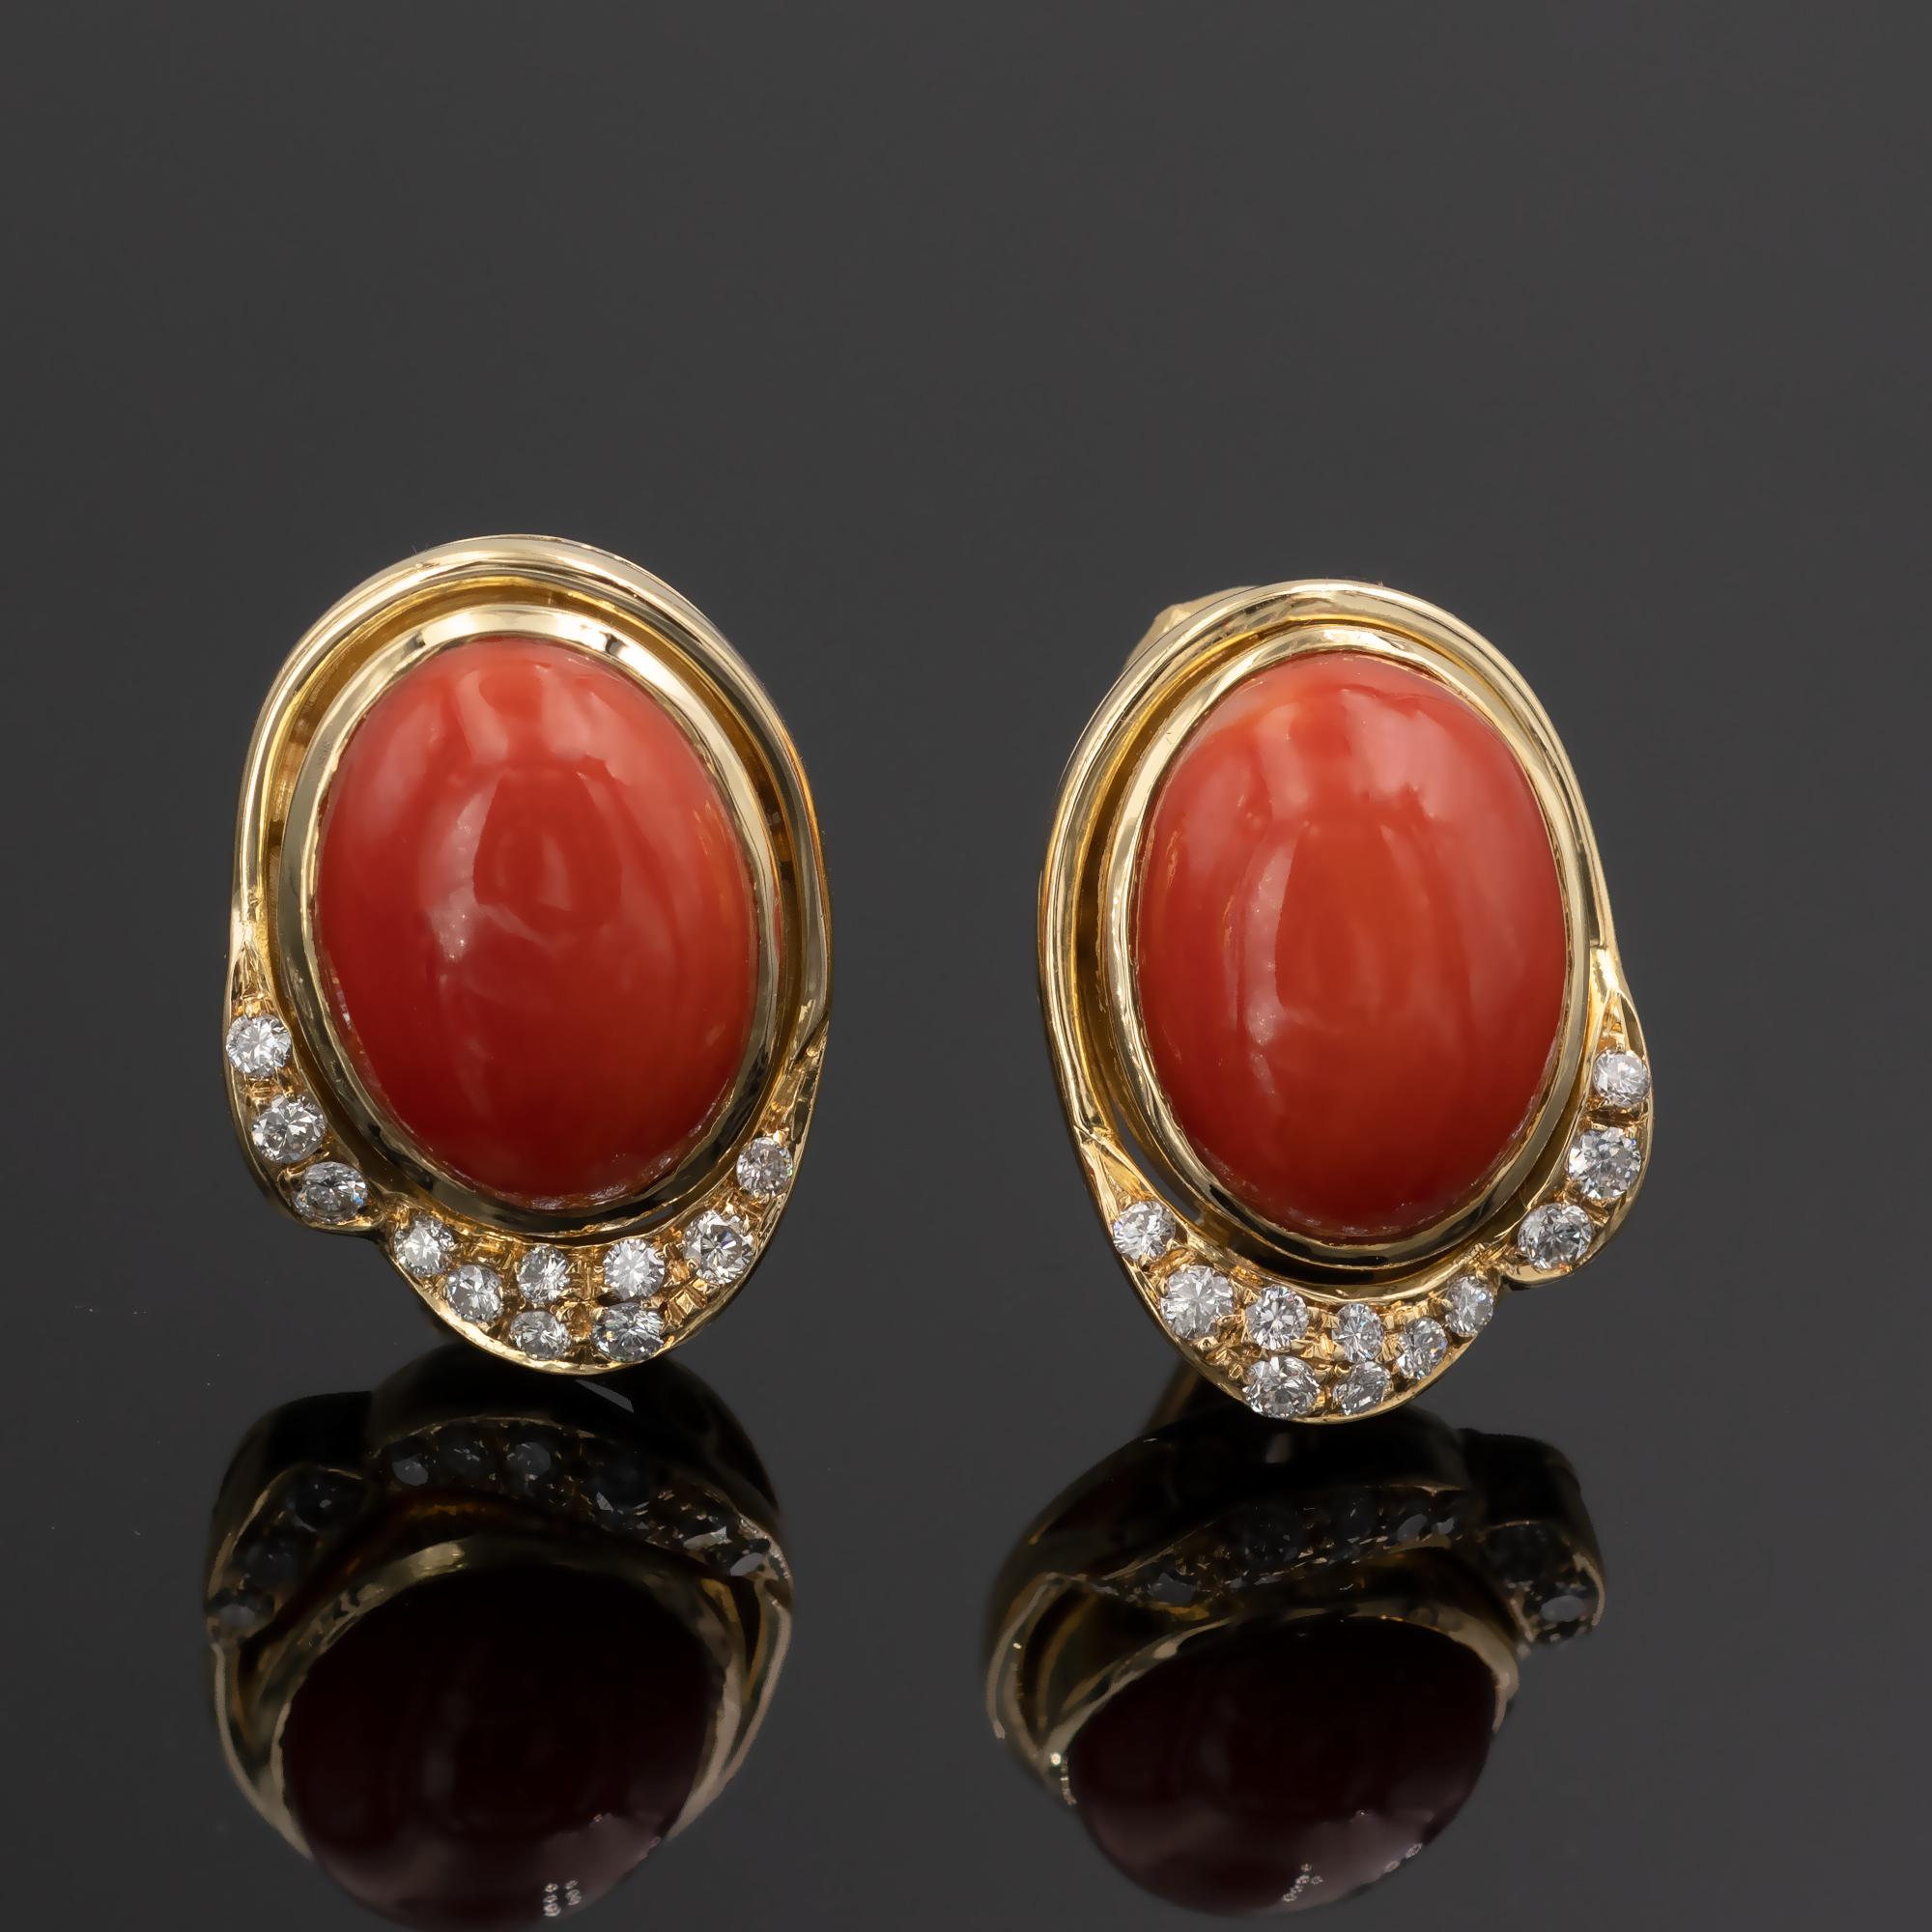 18 Kt yellow gold Coral and diamonds clip-on earrings measuring 2.25 x 1.6 cm. Excellent make, solid 18kt gold, high quality gemstones give these earrings a very nice high end feel. 